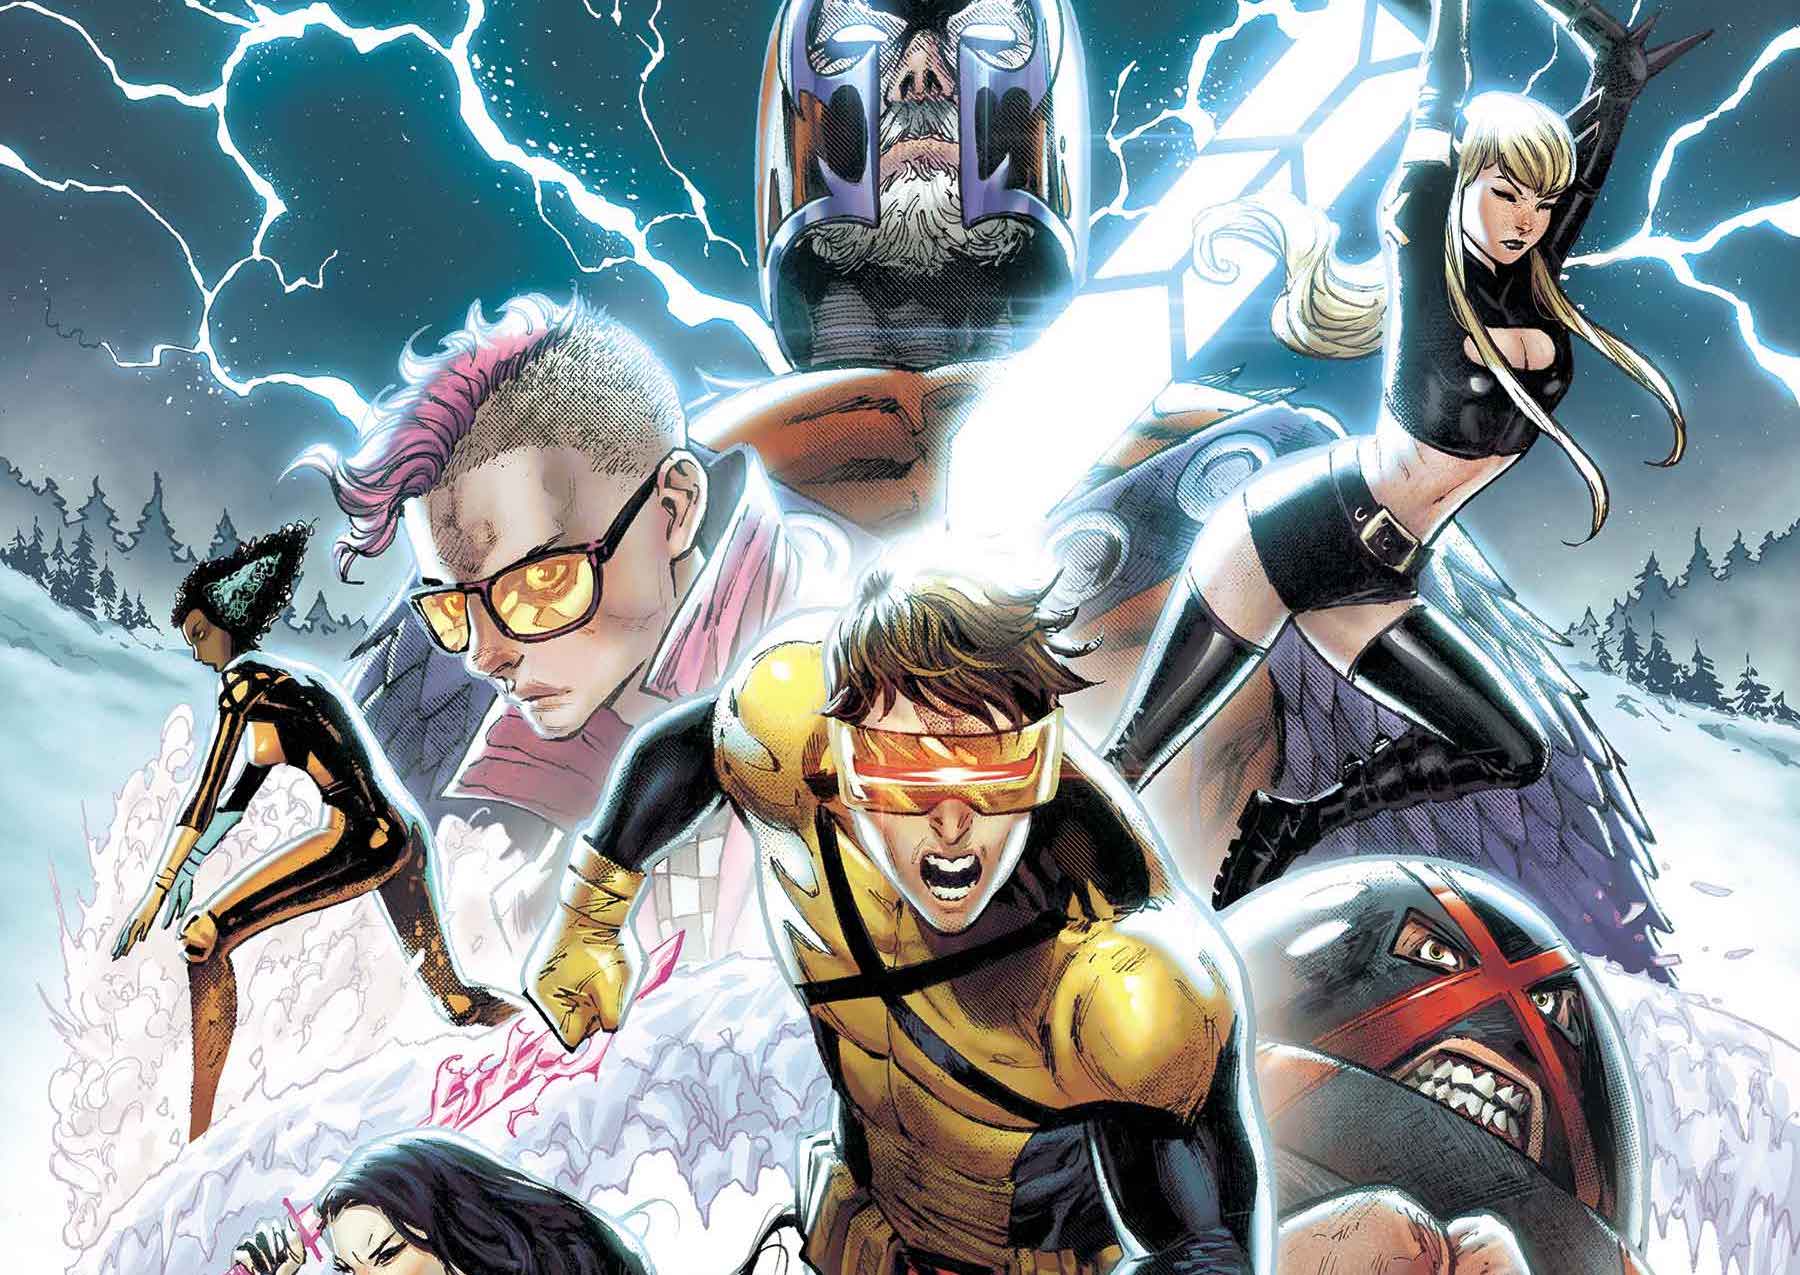 Get hype over new 'X-Men' #1 variant covers